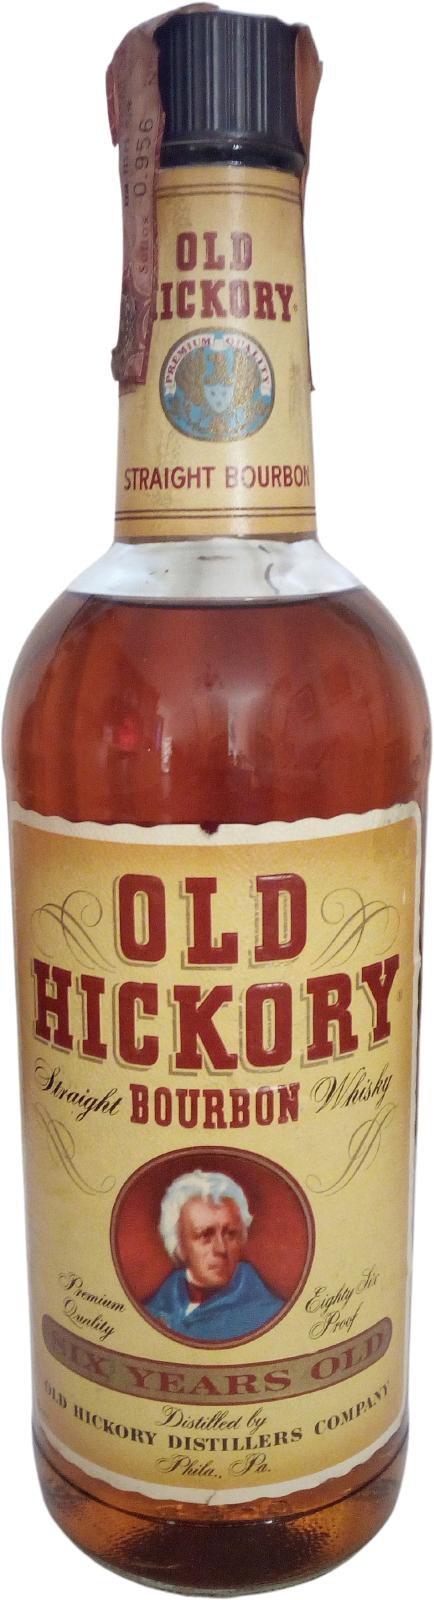 Old Hickory 06-year-old